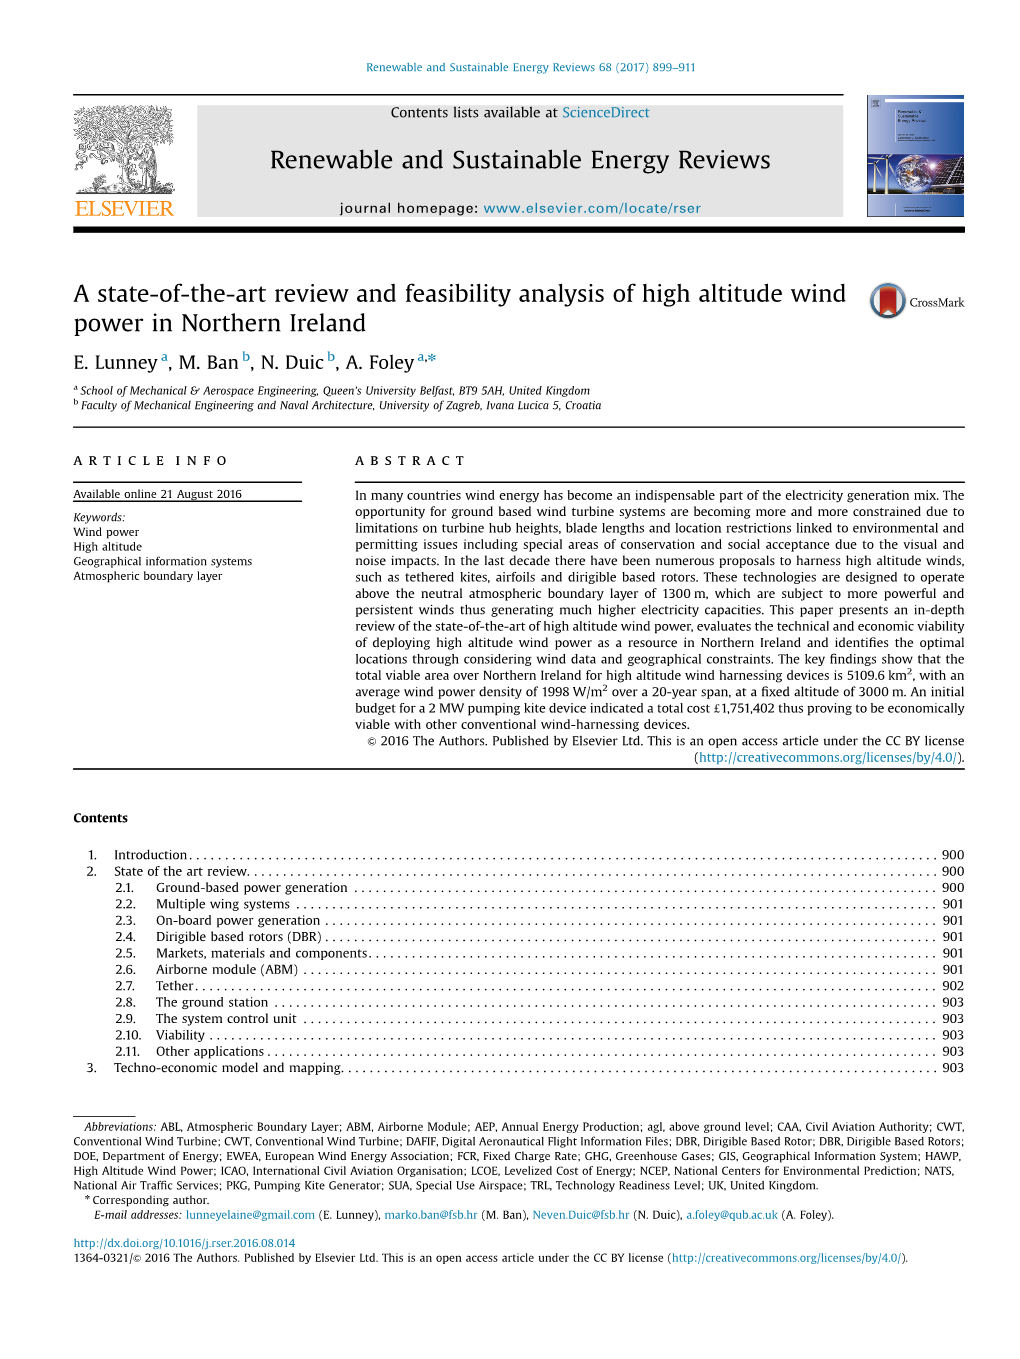 A State-Of-The-Art Review and Feasibility Analysis of High Altitude Wind Power in Northern Ireland